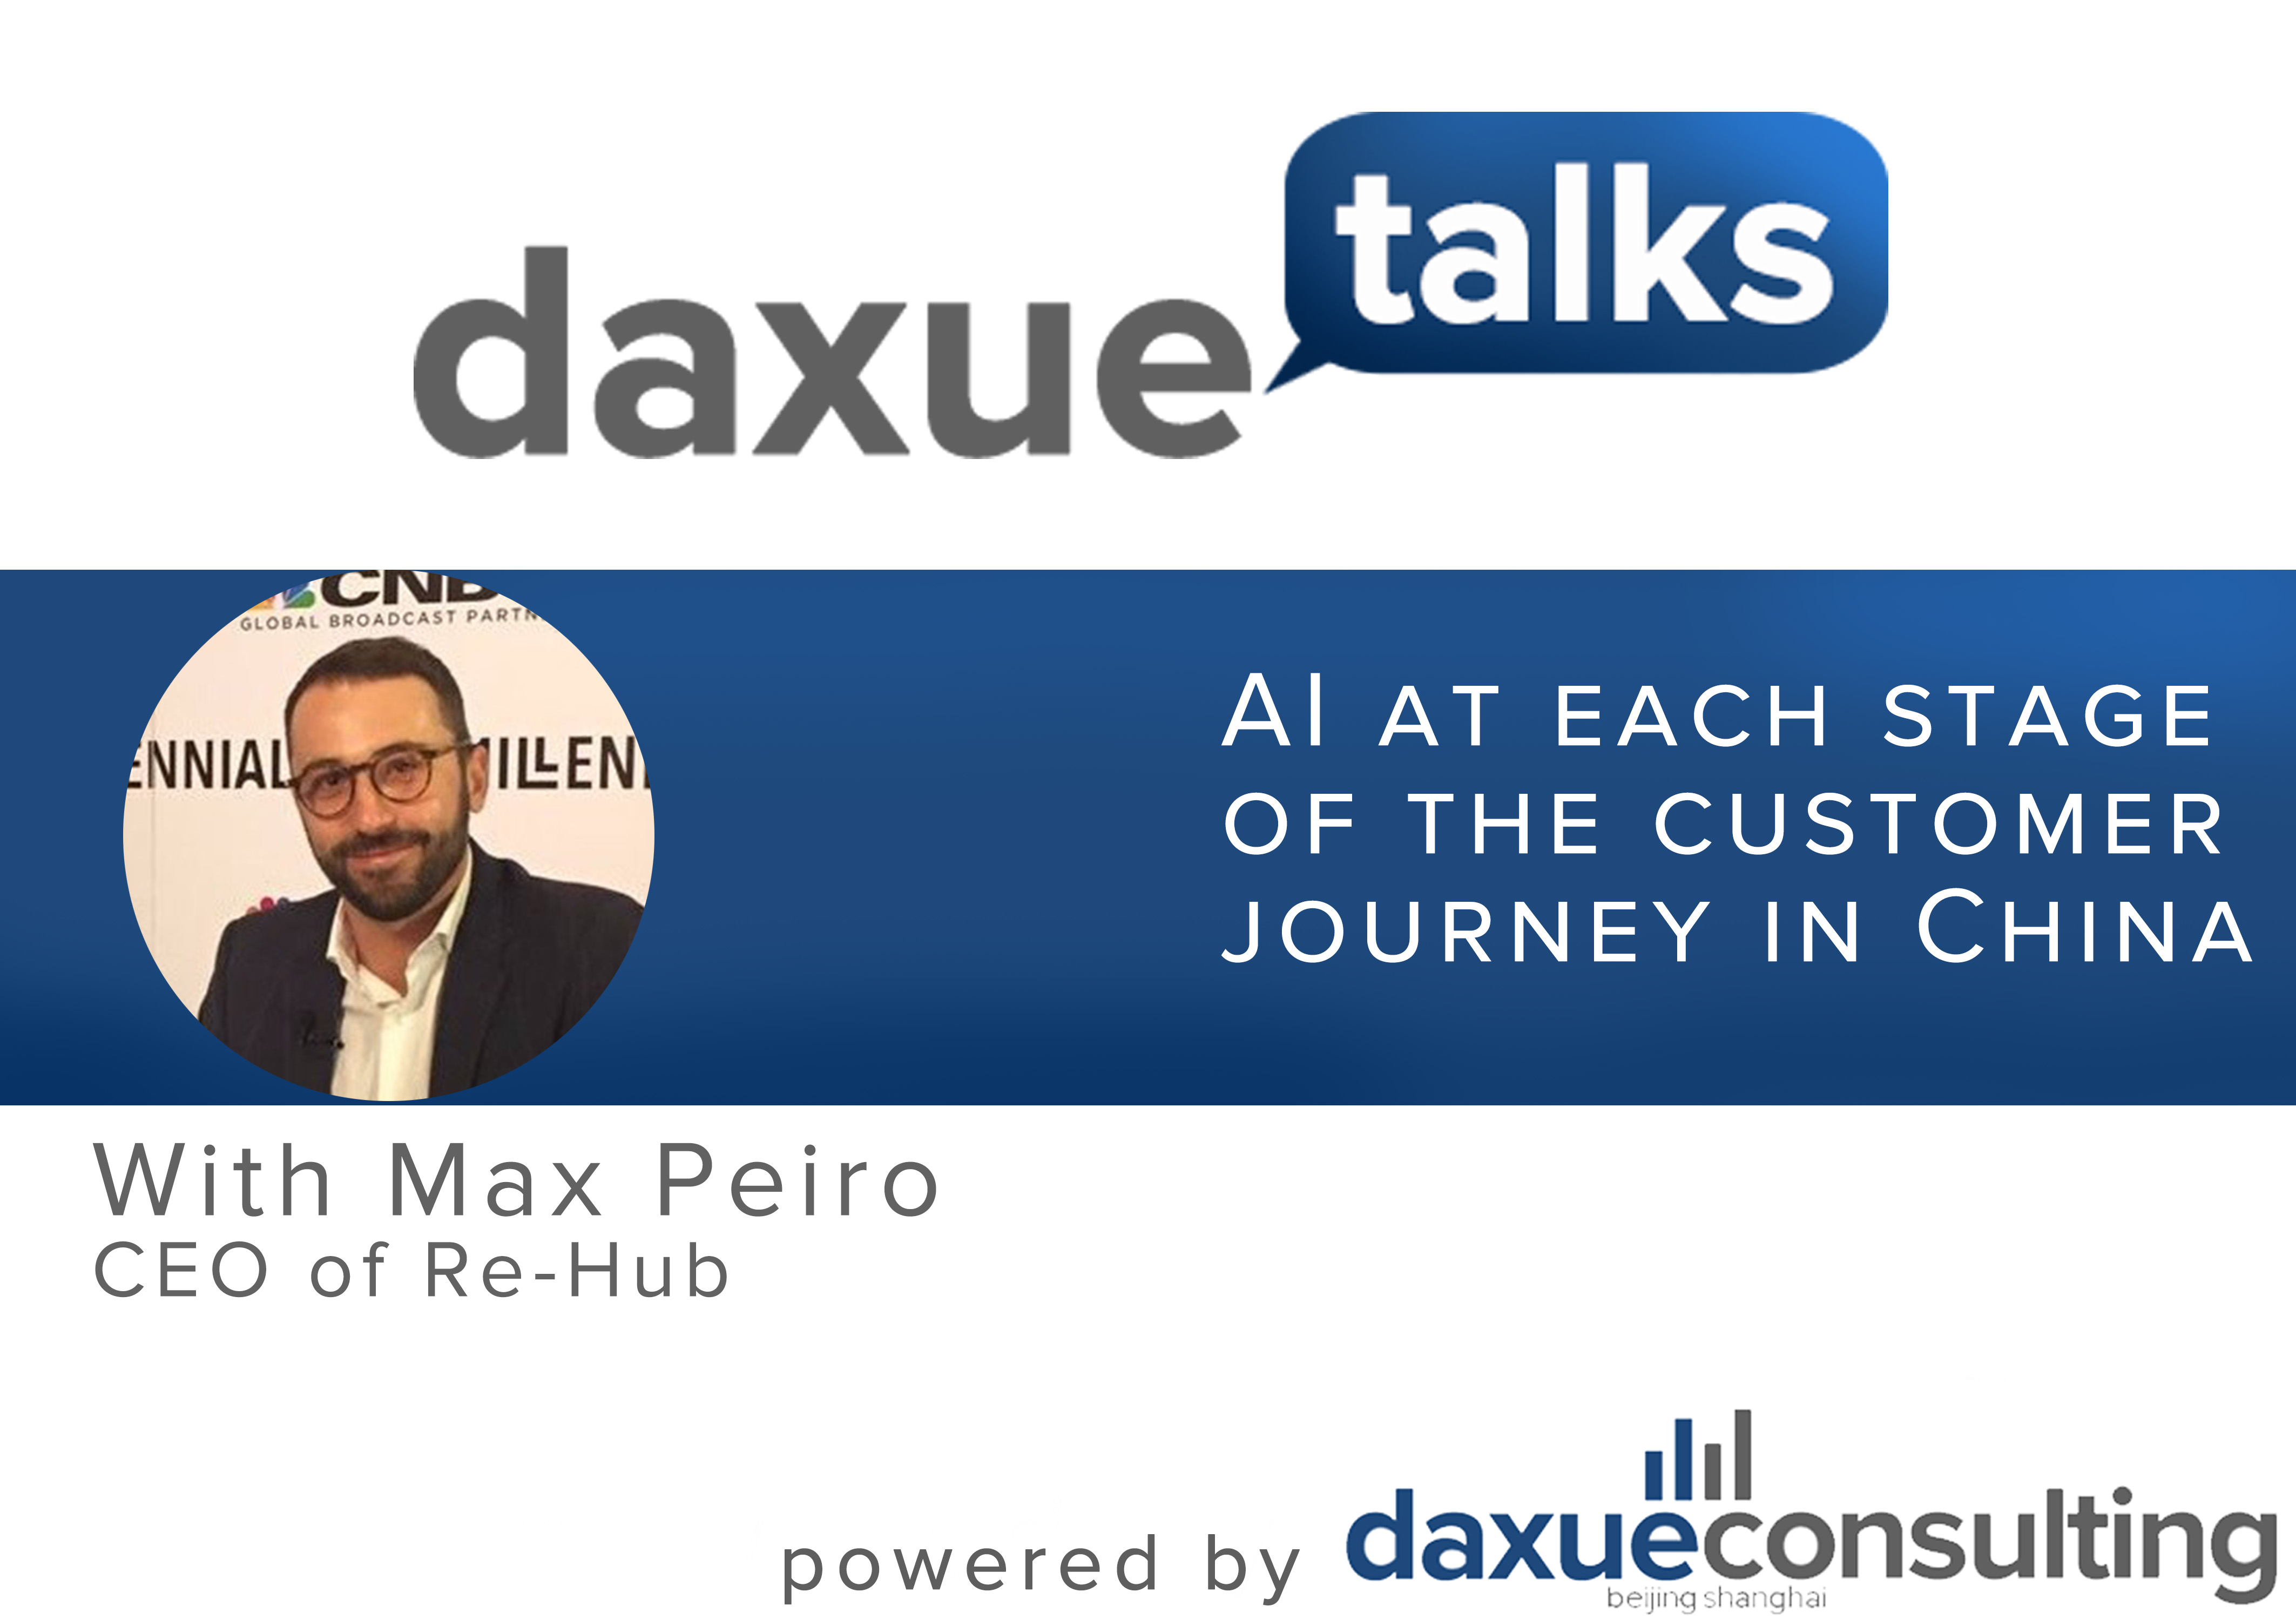 Daxue Talks 25: Artificial intelligence at each stage of the customer journey in China